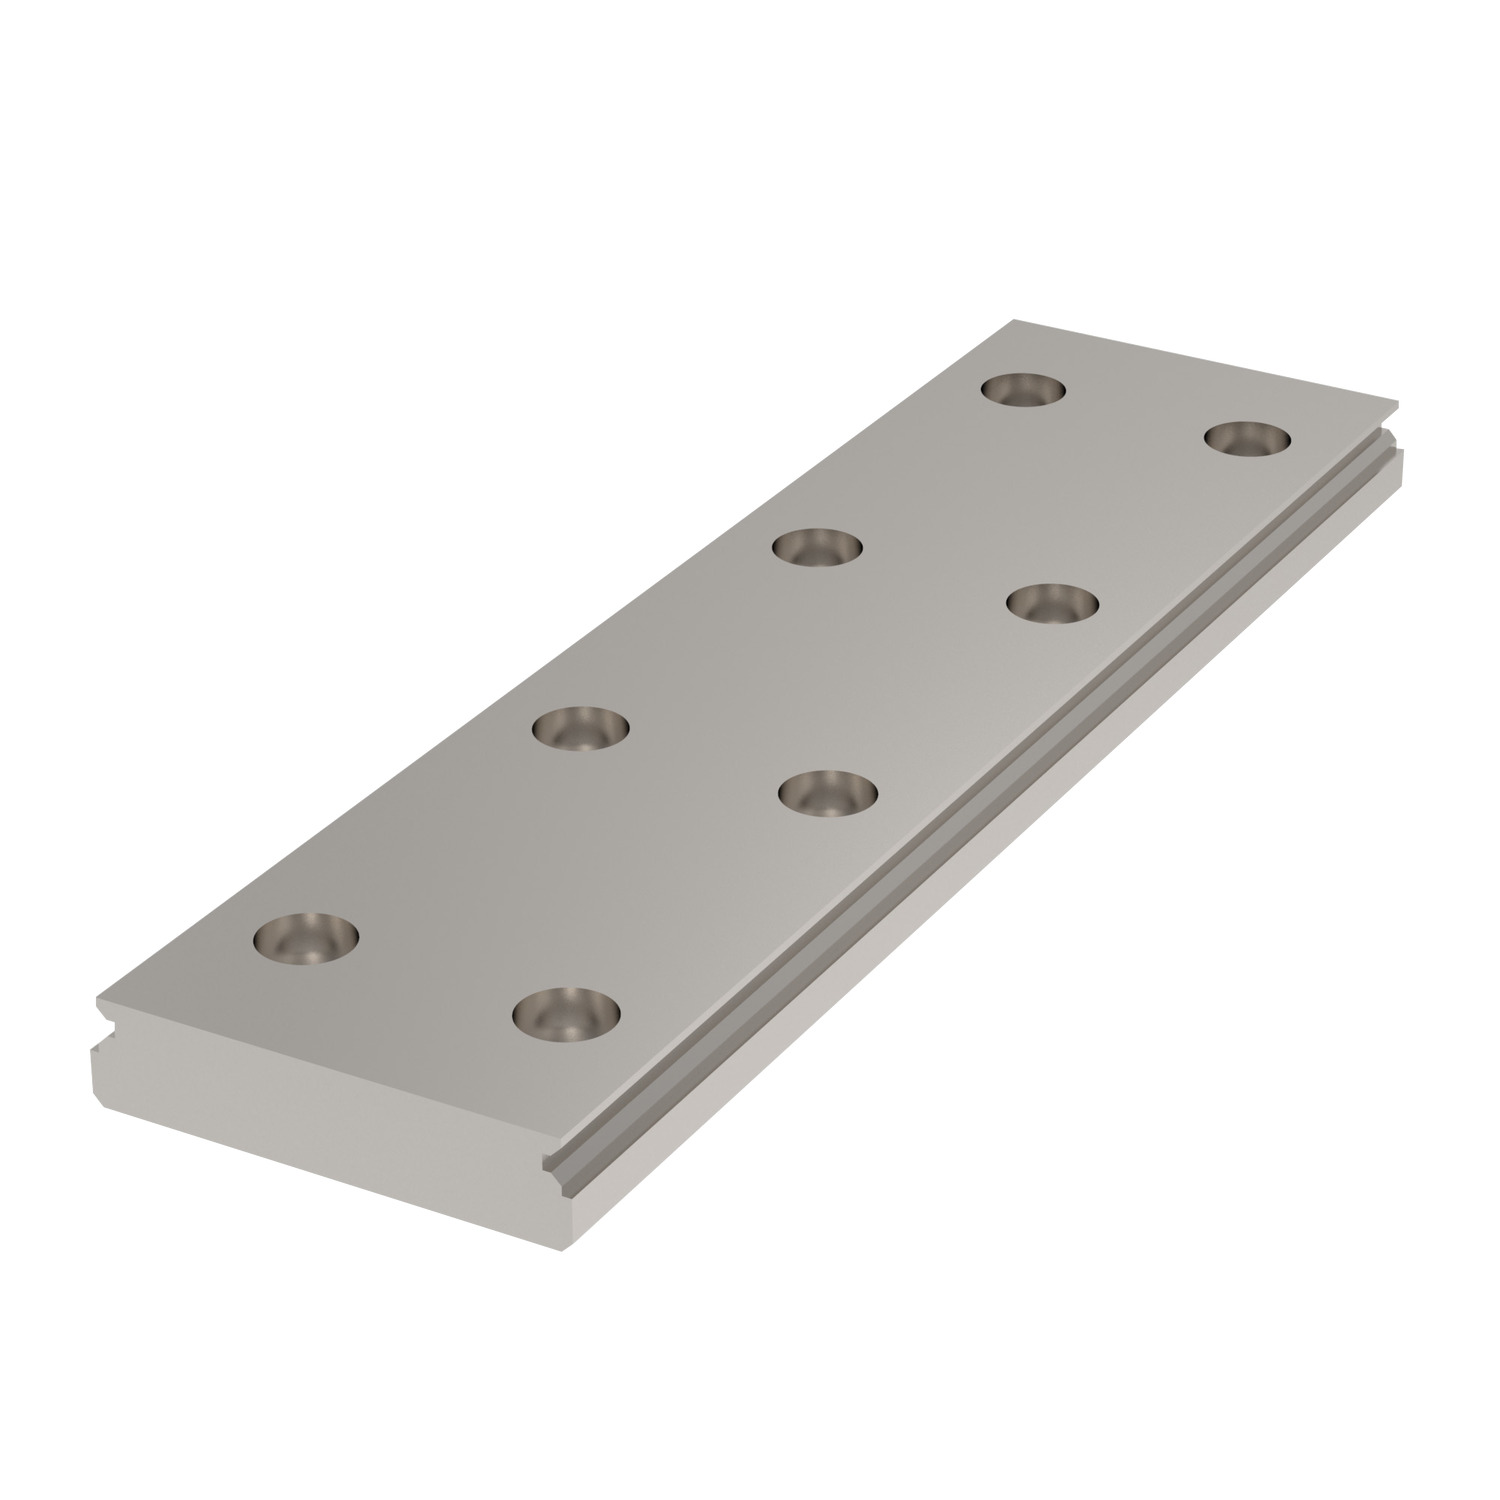 42mm Miniature Linear Rail 42mm miniature linear rails, wide version. Corrosion resistant stainless steel body. Other rail sizes available on request